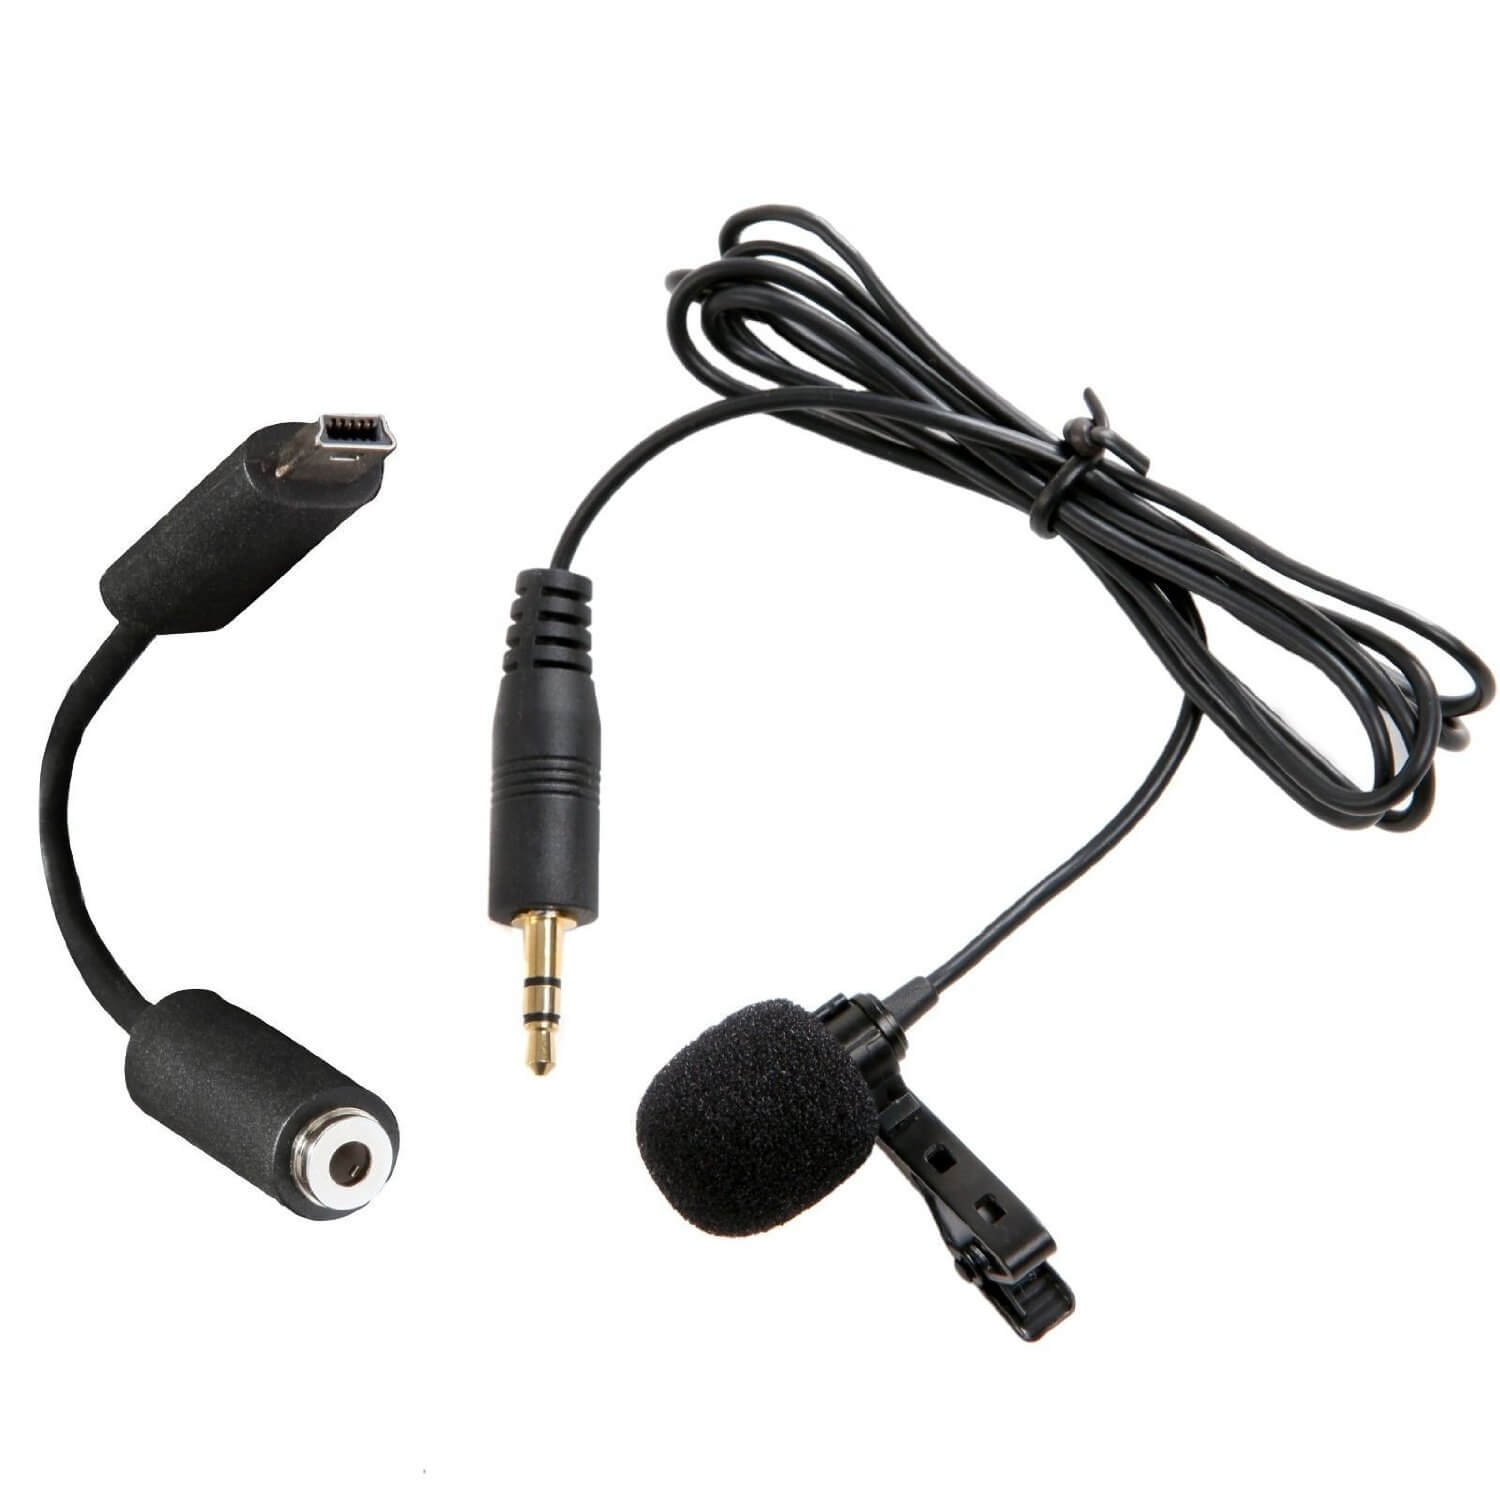 Movo GM100 Lavalier Clip-on Omni directional Microphone